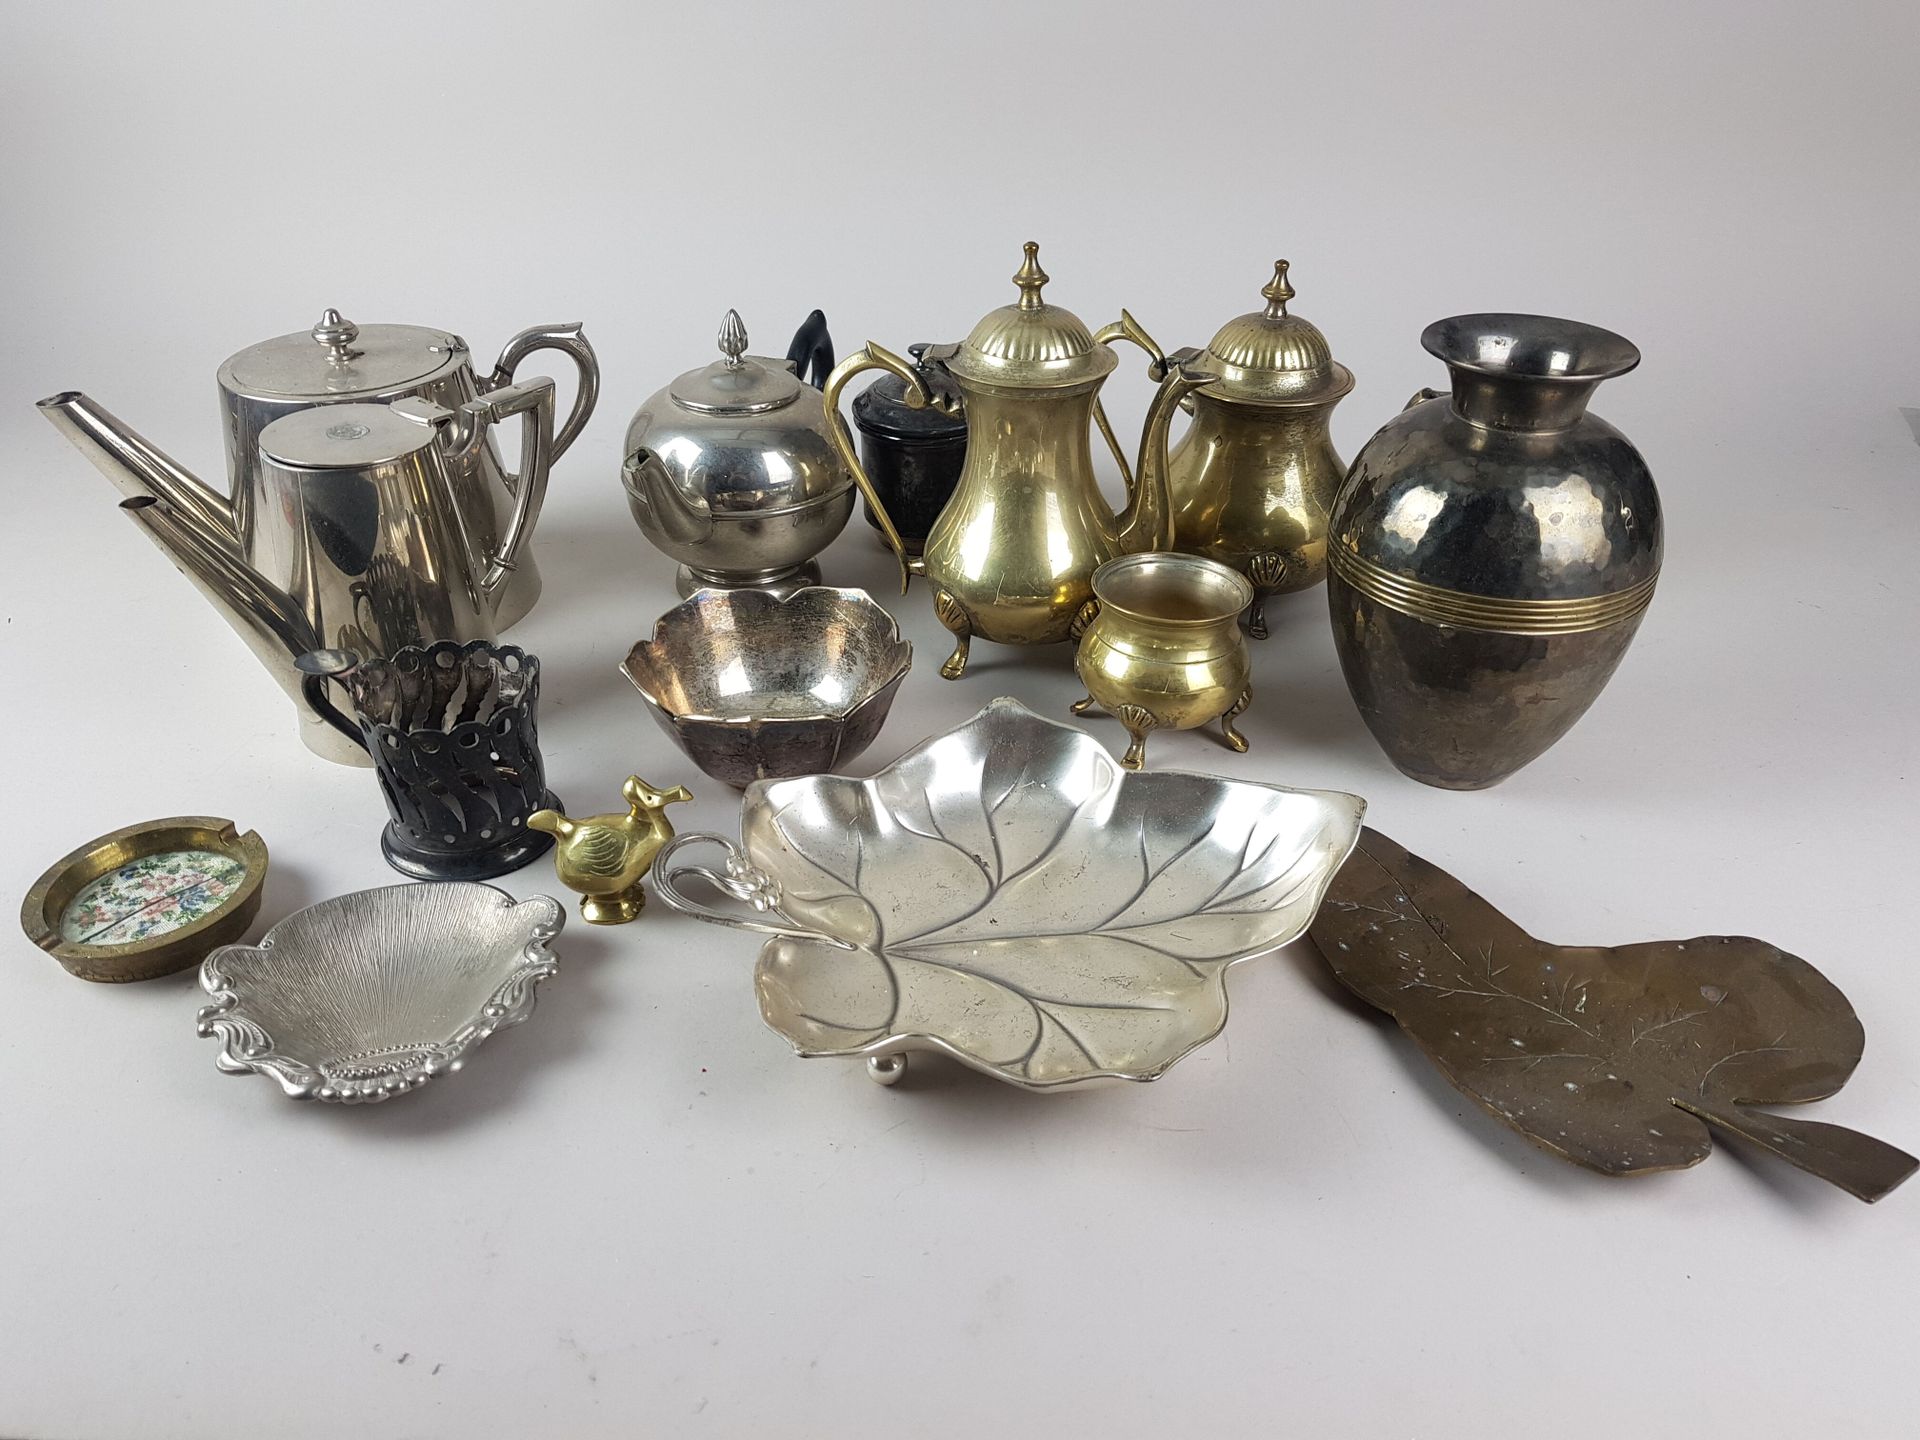 Null LOT of silver plated metal and copper - wear and tear